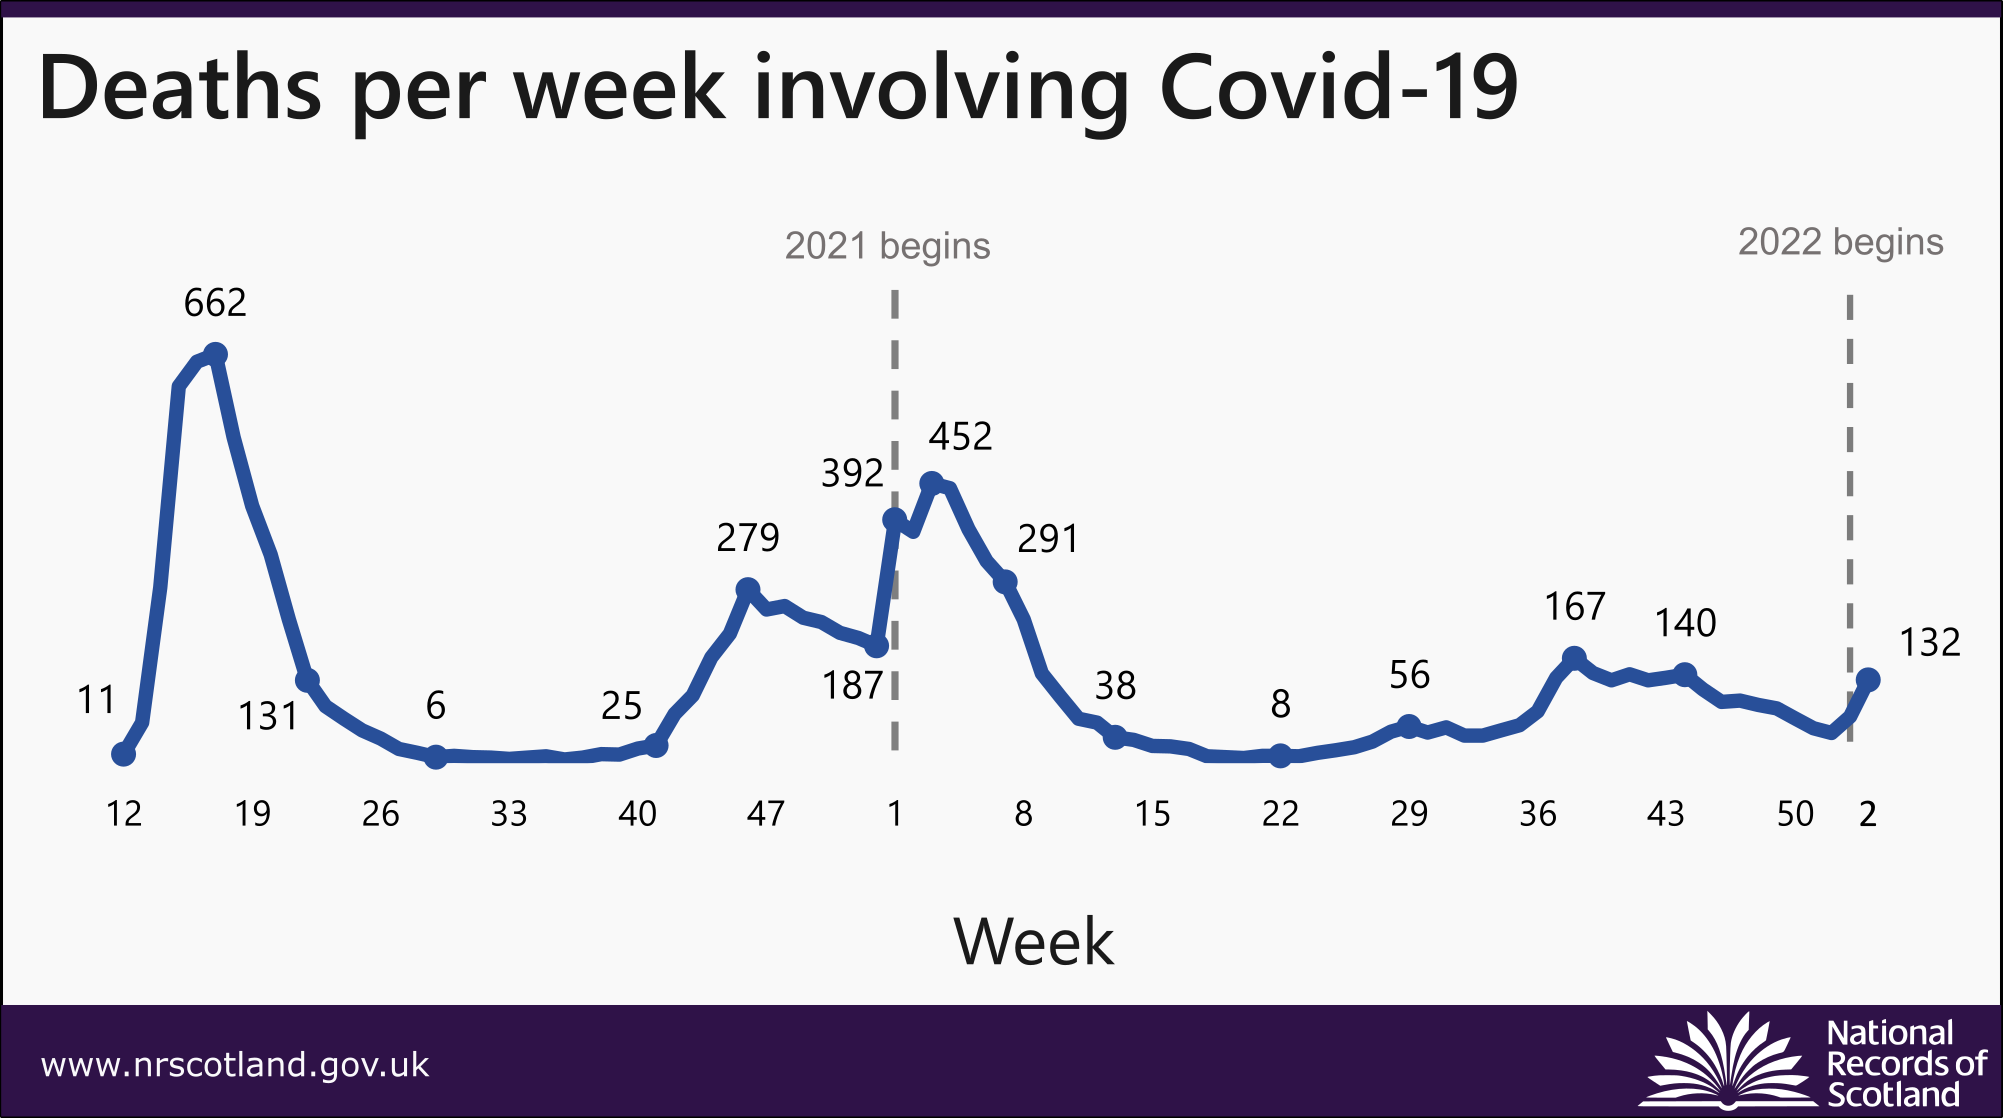 COVID-19 News Release Chart